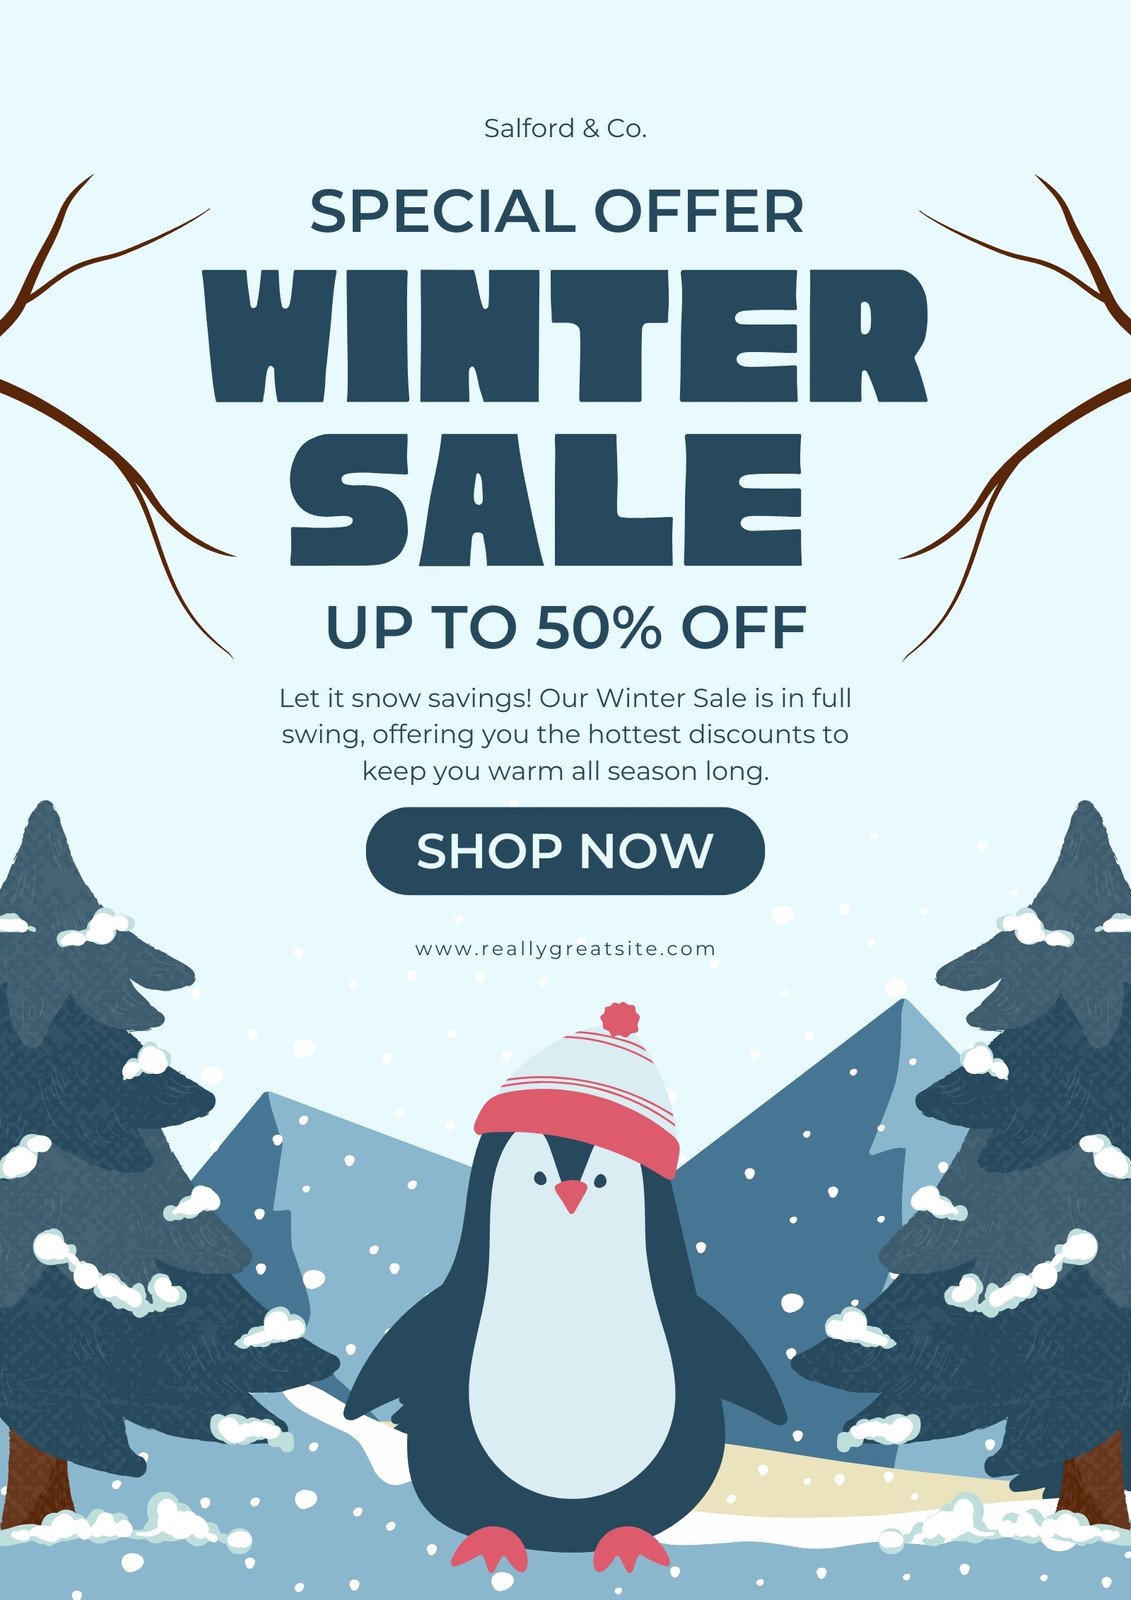 Winter Sale Poster